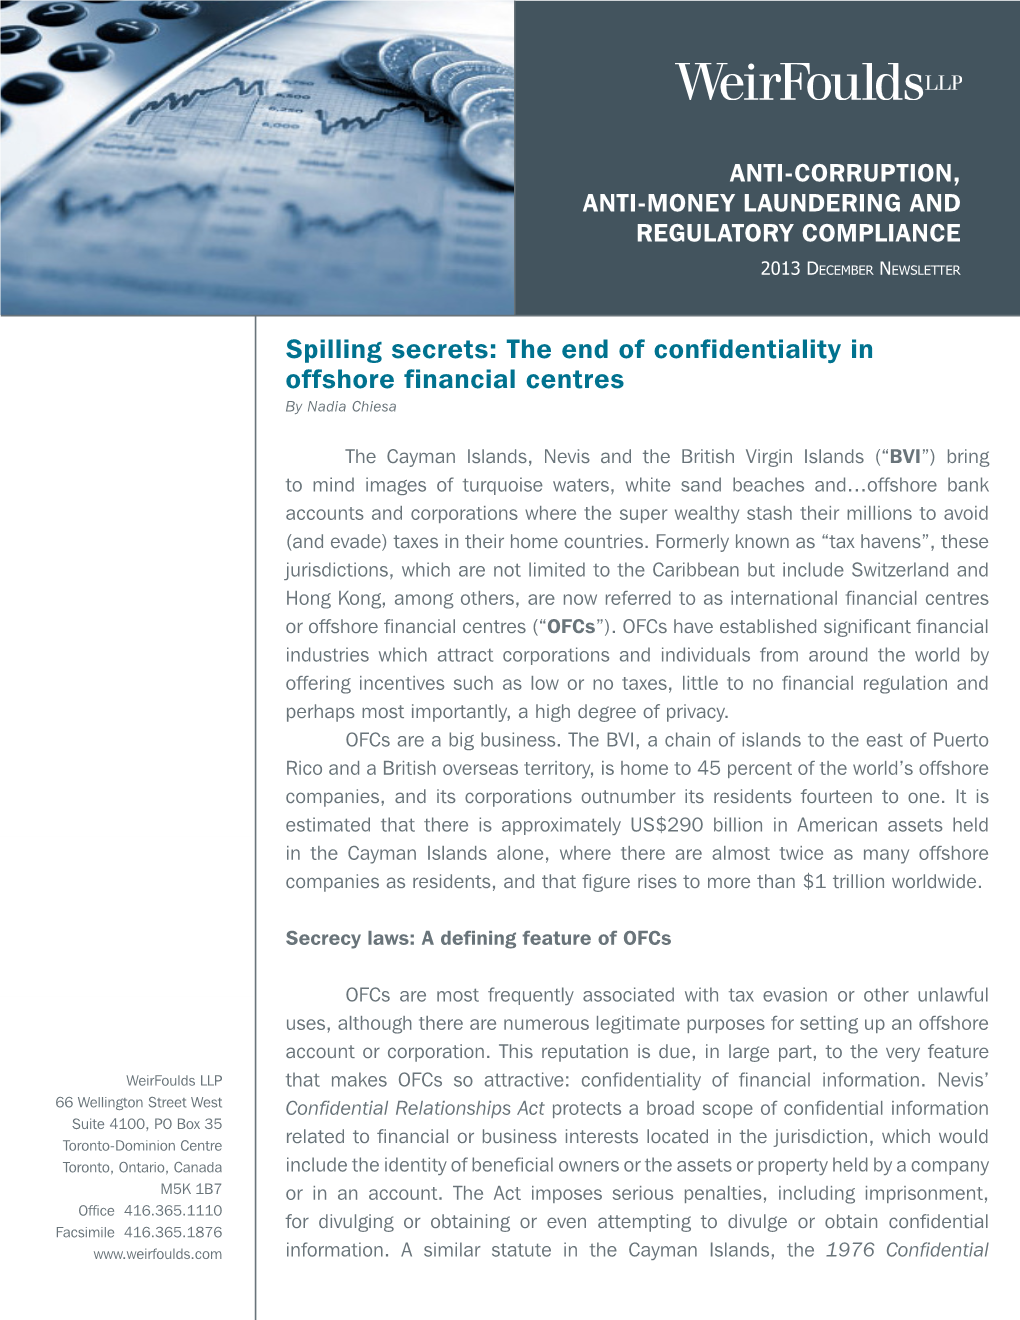 The End of Confidentiality in Offshore Financial Centres by Nadia Chiesa